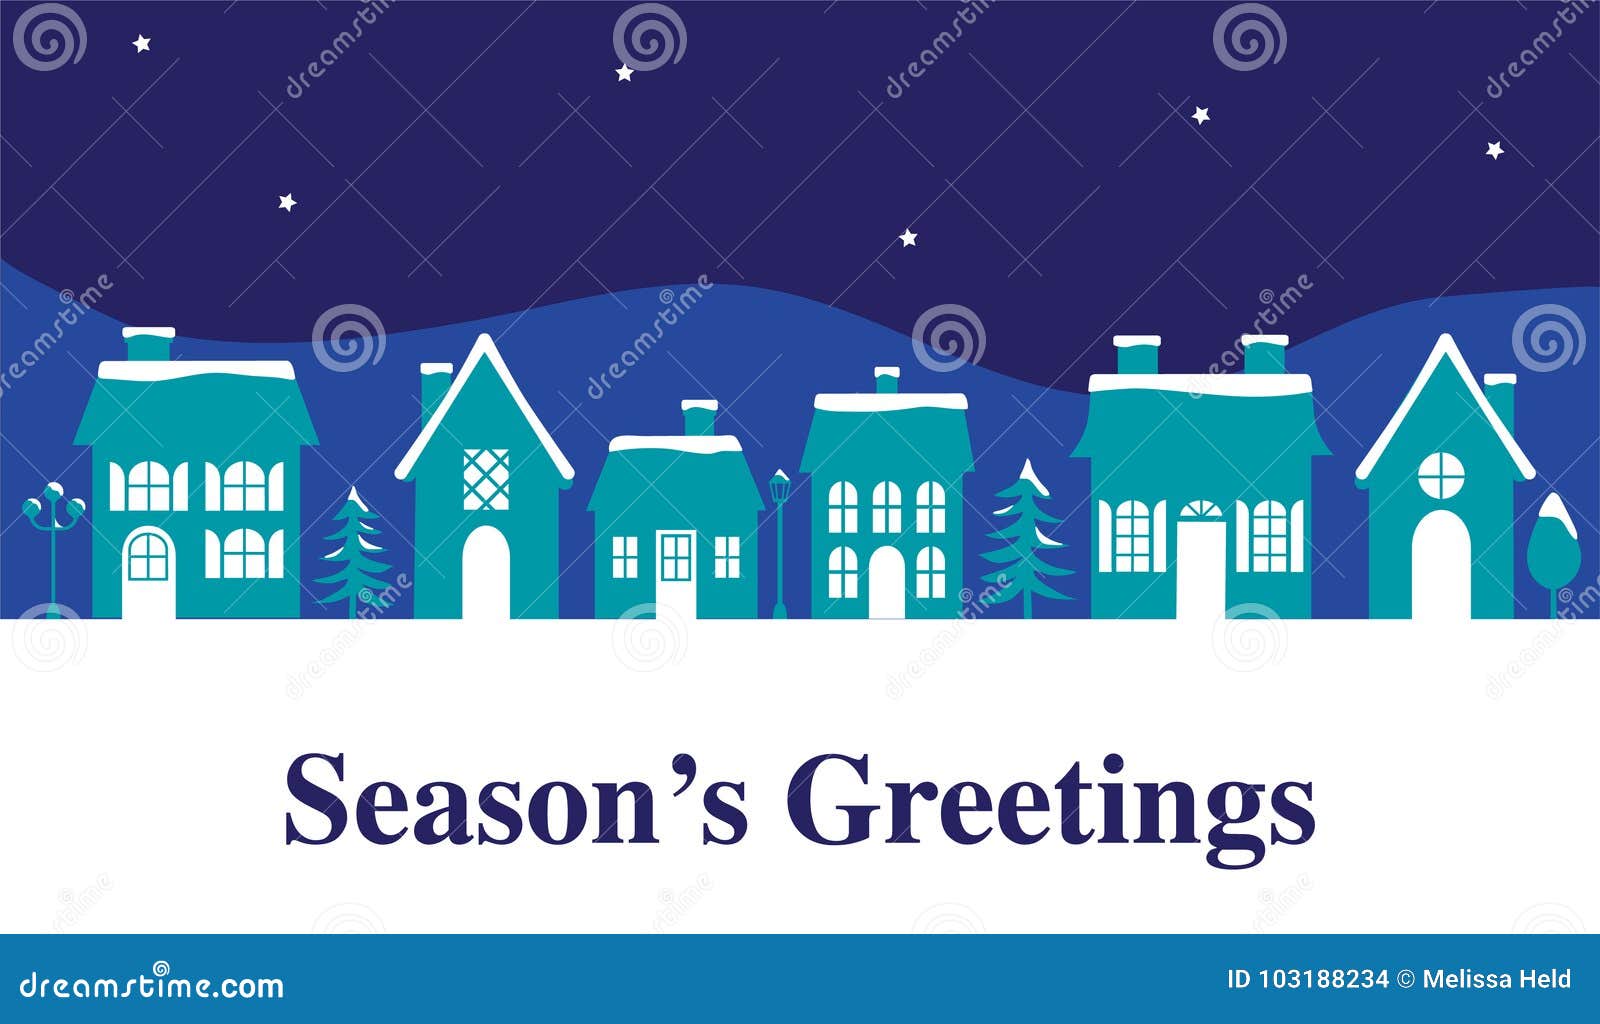 seasons greetings graphic with houses